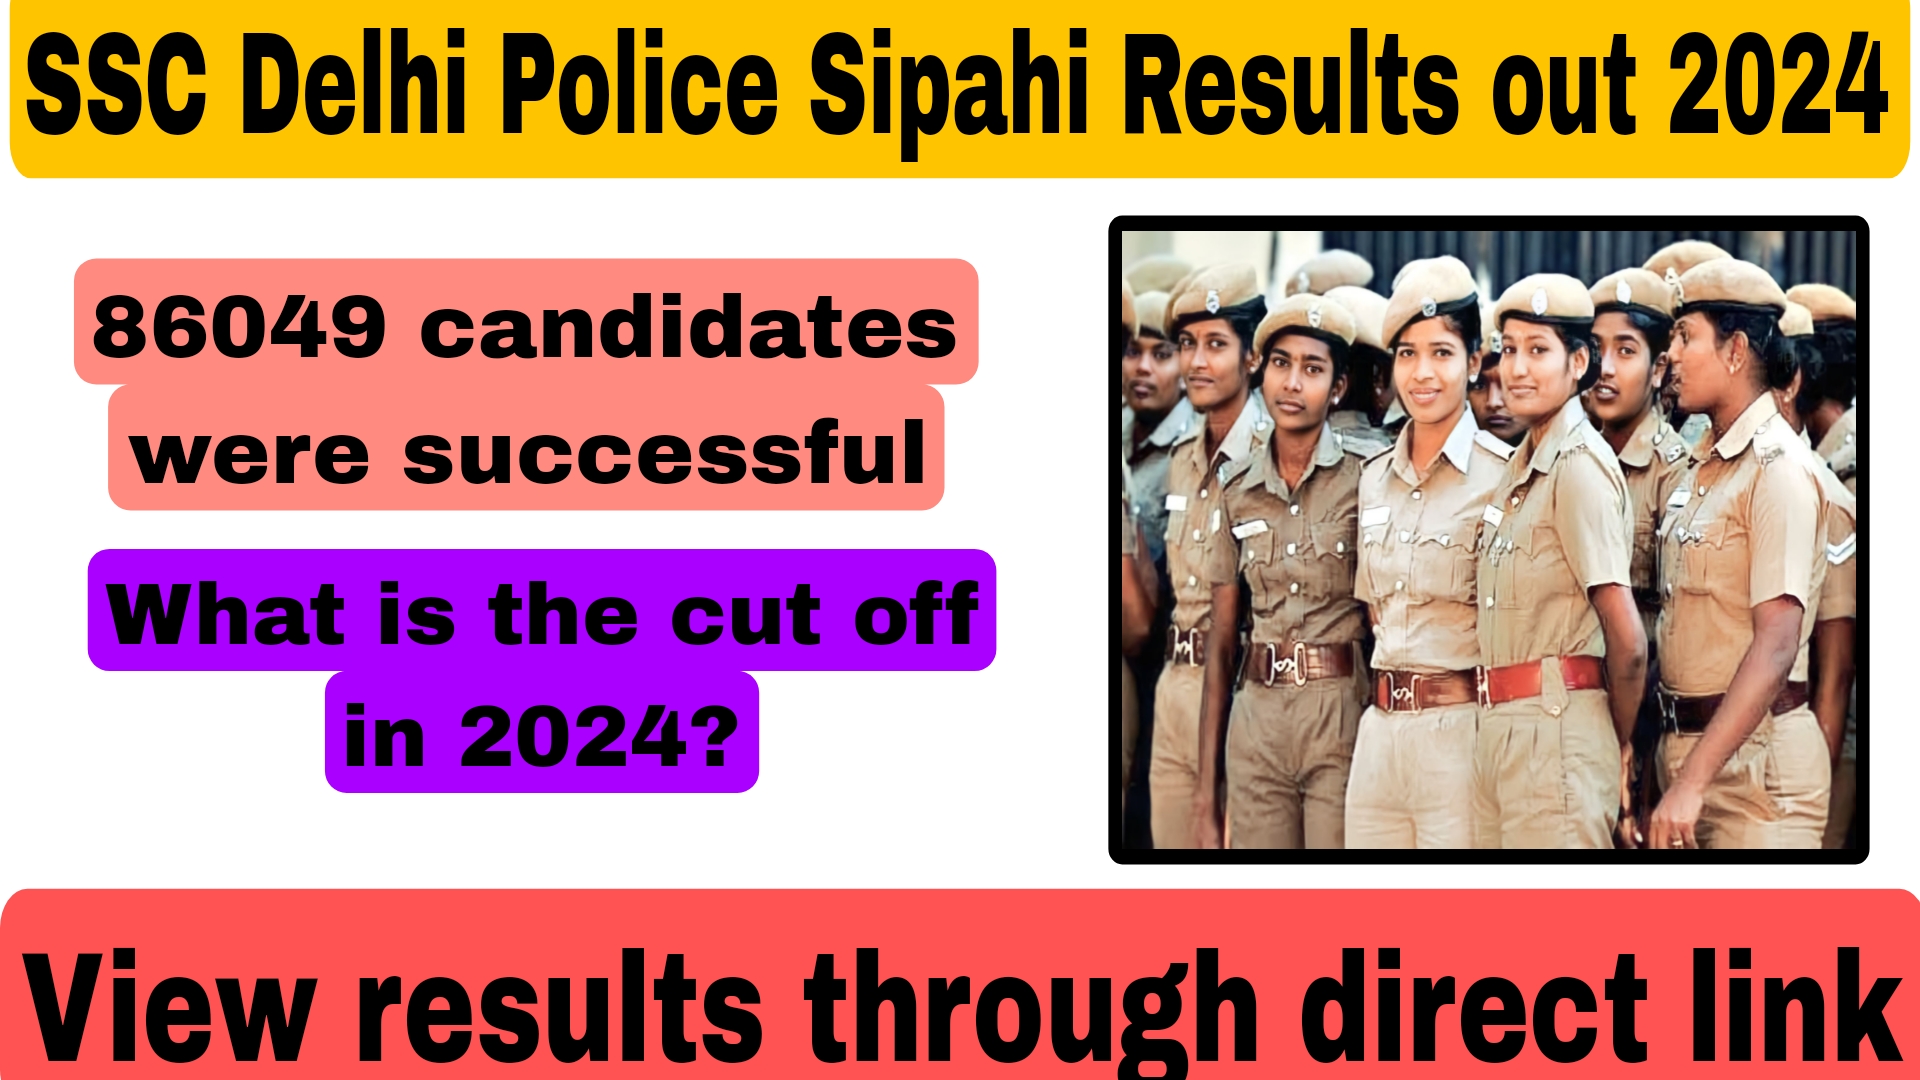 SSC Delhi Police Sipahi Result Out 2024 86049 candidates were